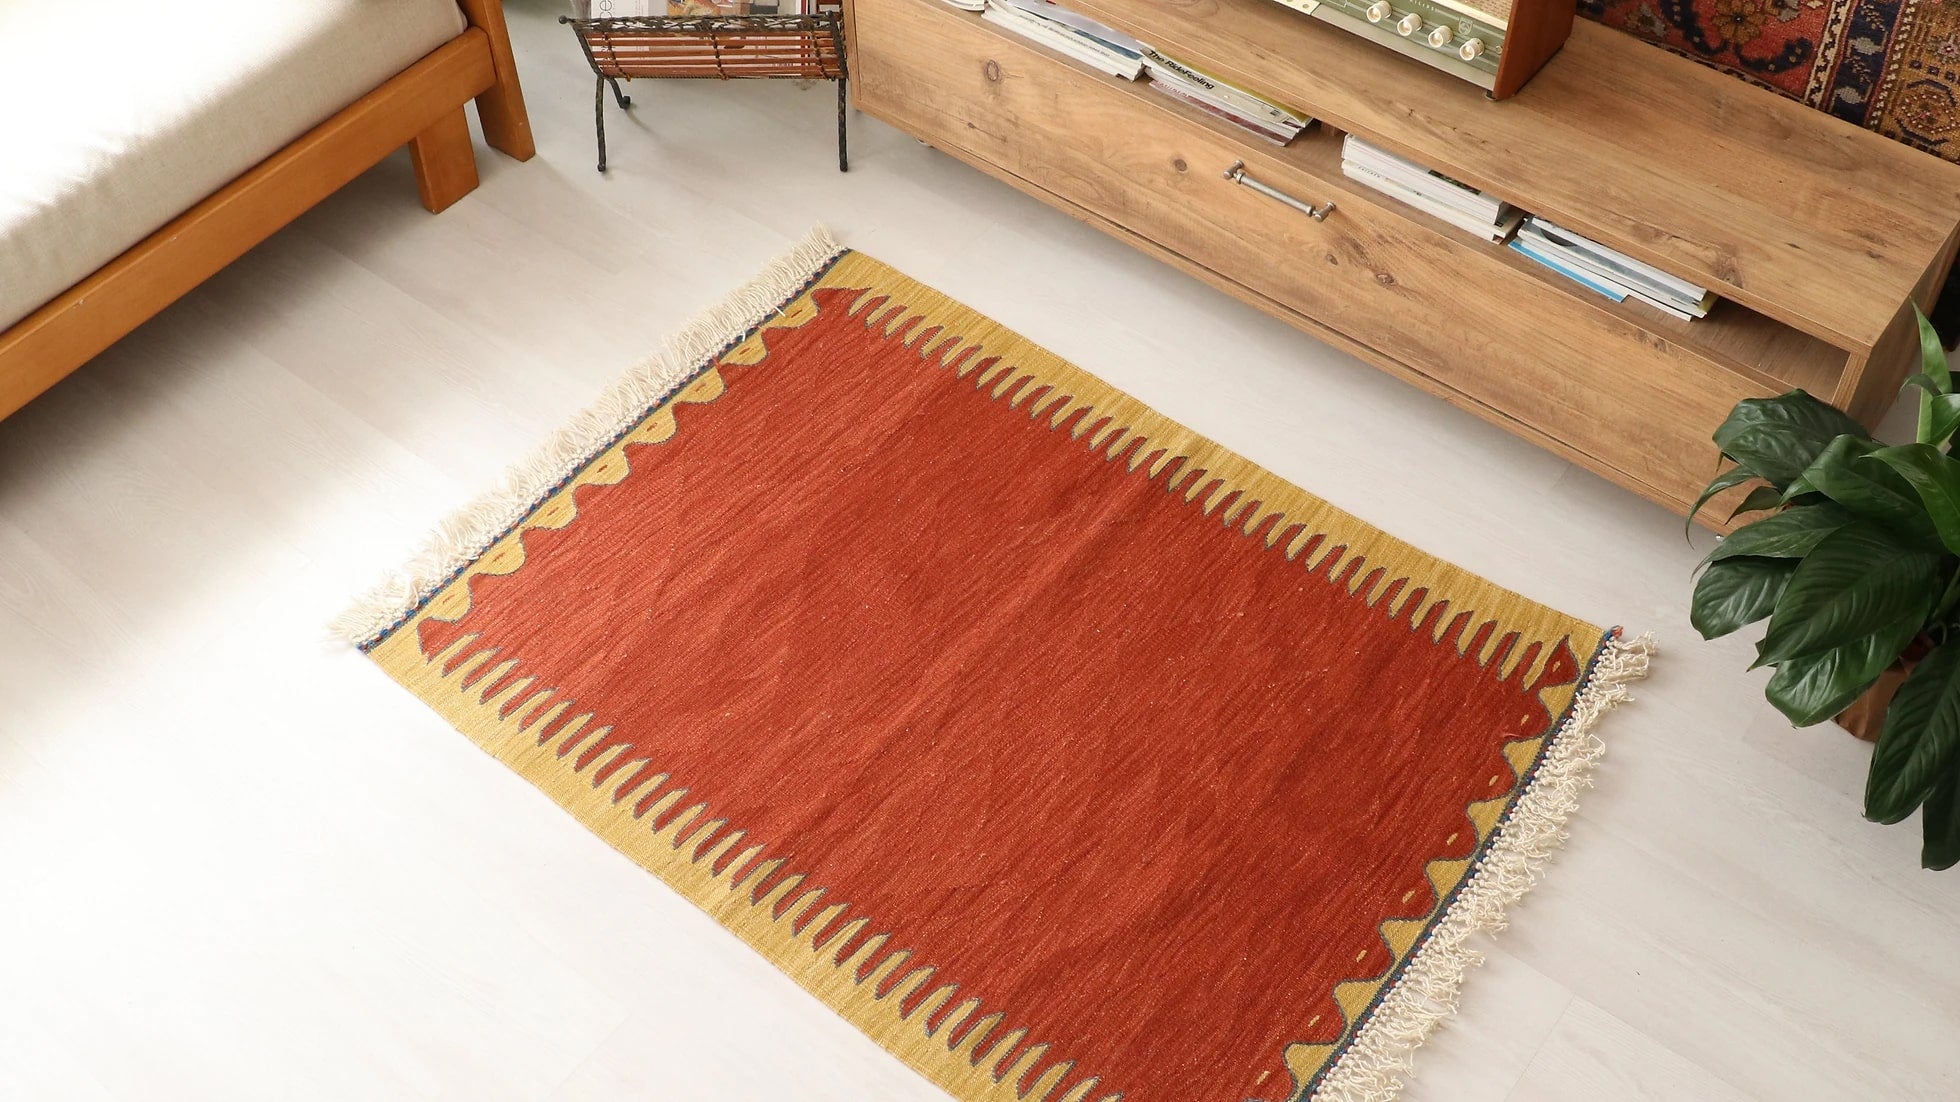 simple and minimal turkish rug in red and yellow showcasing traditional motifs and white tassels/fringes sourced from the world-renowned city Bodrum